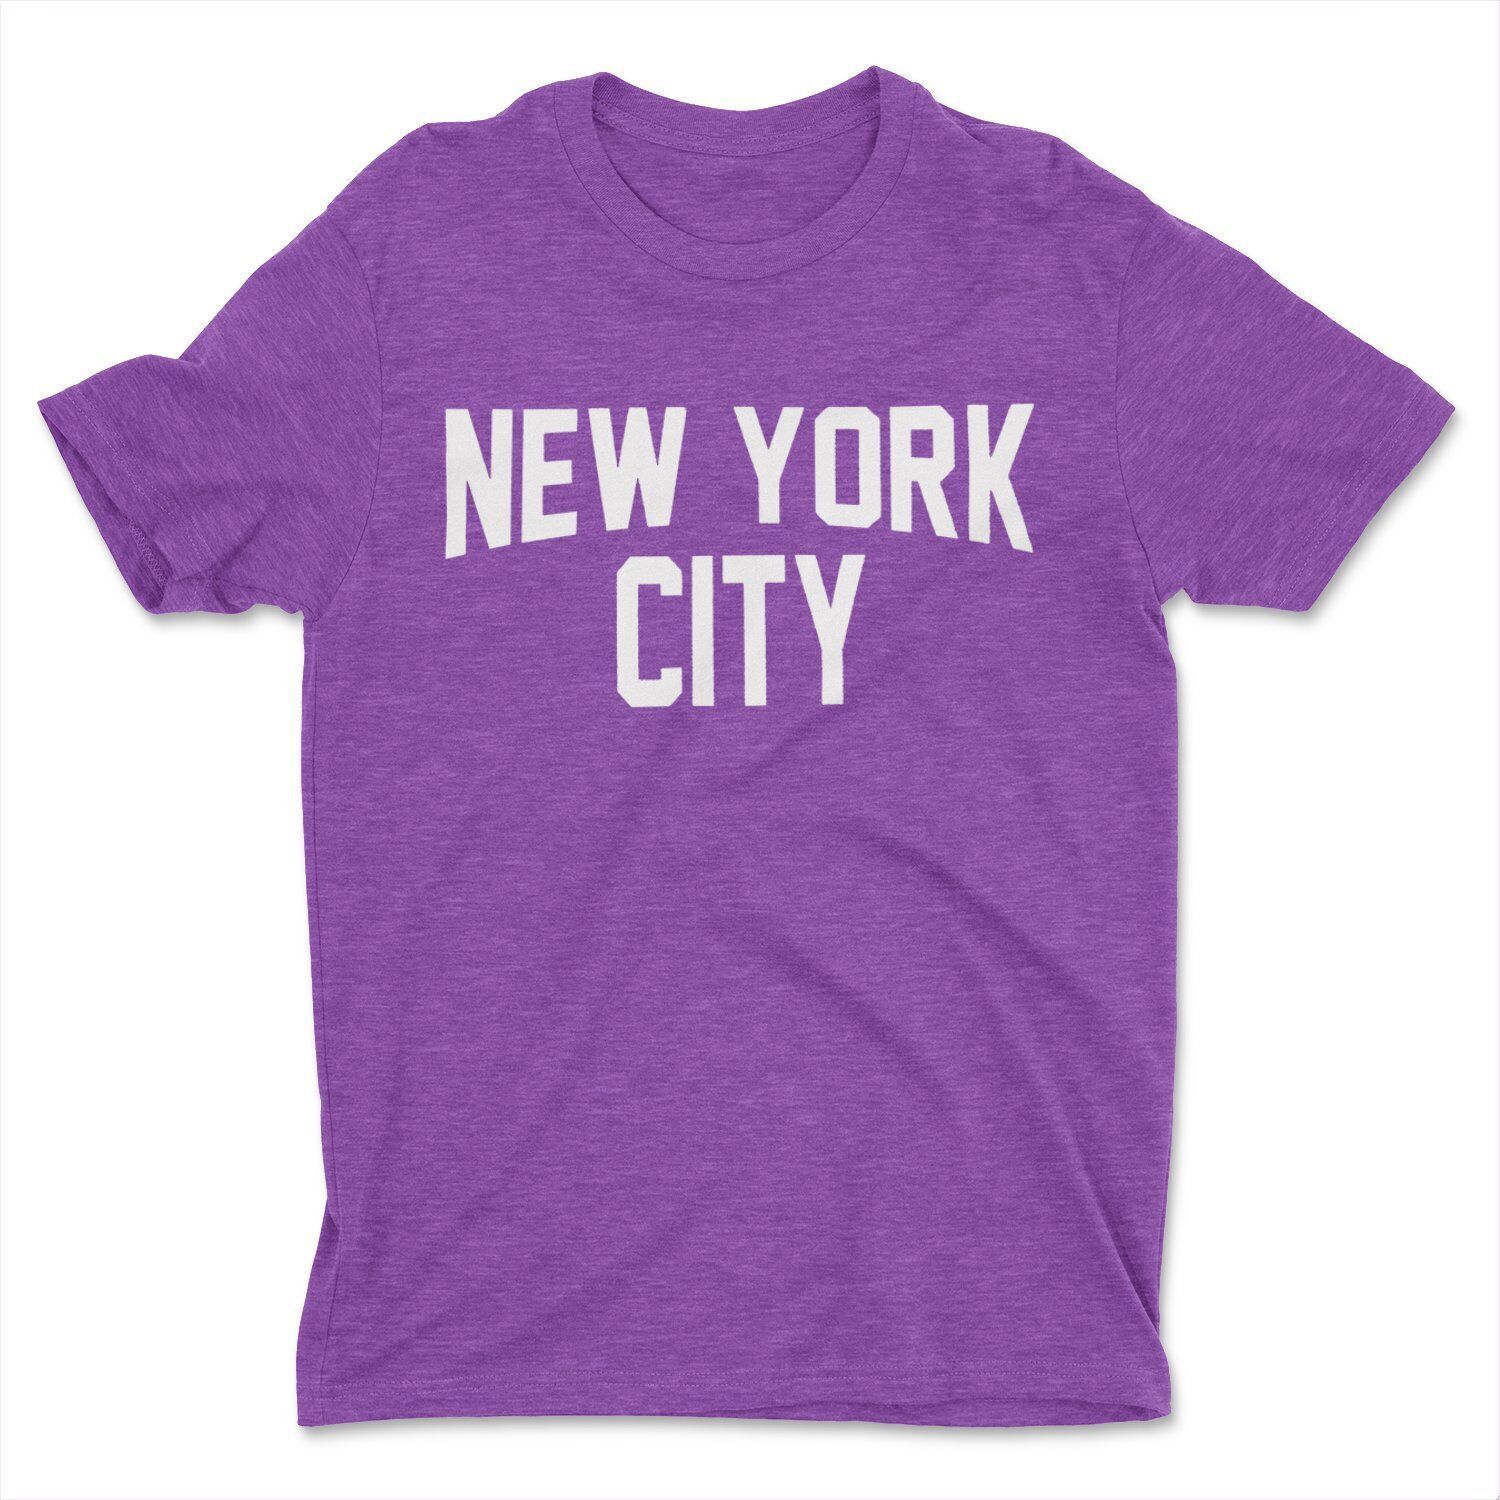 Primary image for New York City Men's T-Shirt Soft Ringspun Cotton (Heather Green)